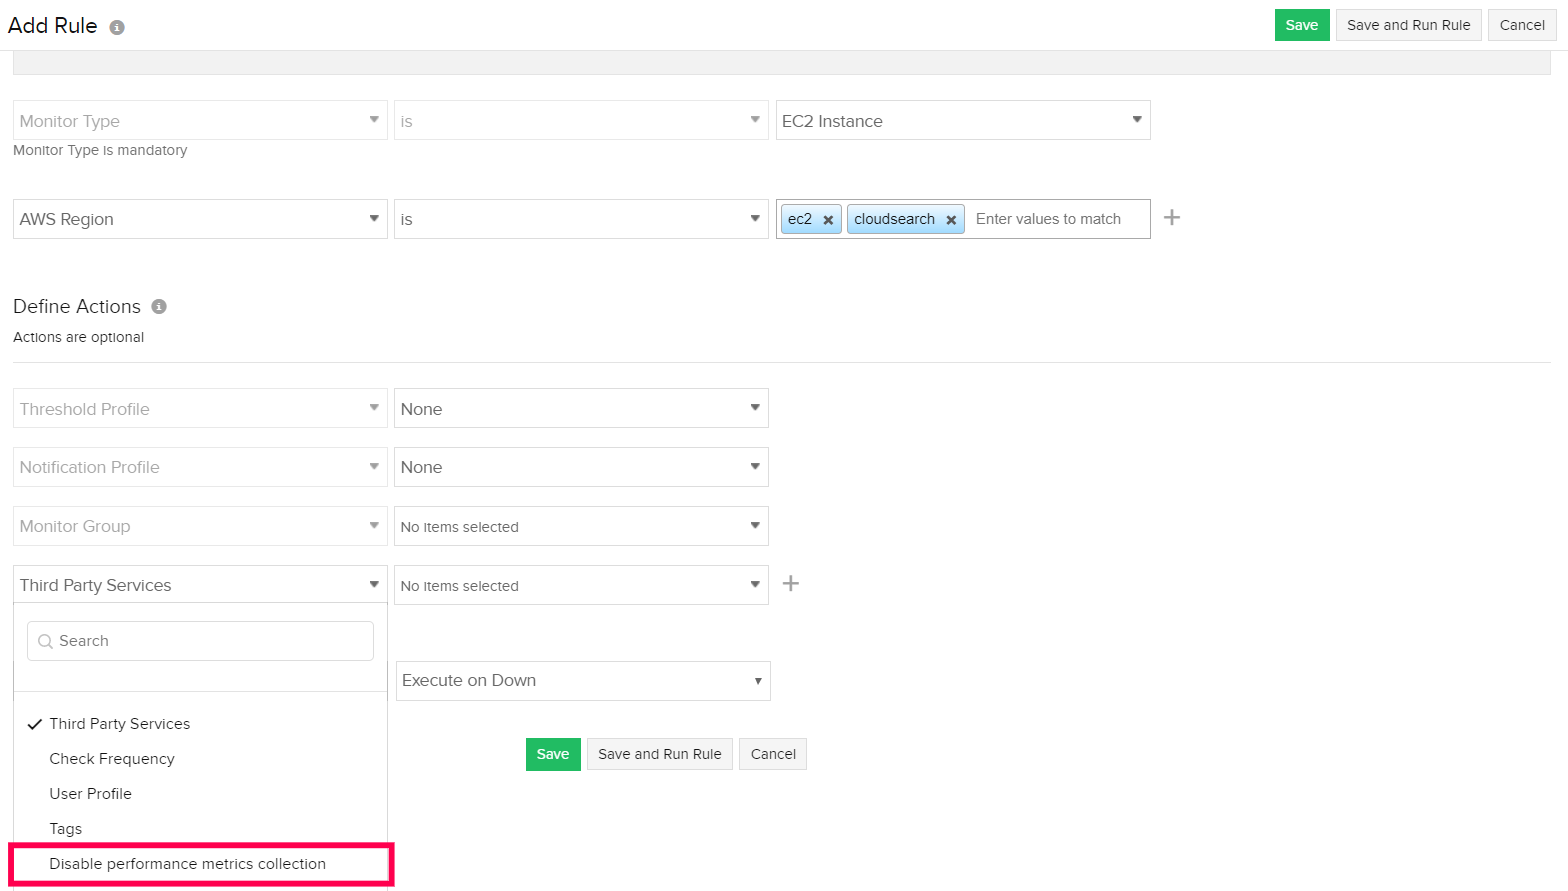 Configure rules to enable uptime monitoring of AWS resource